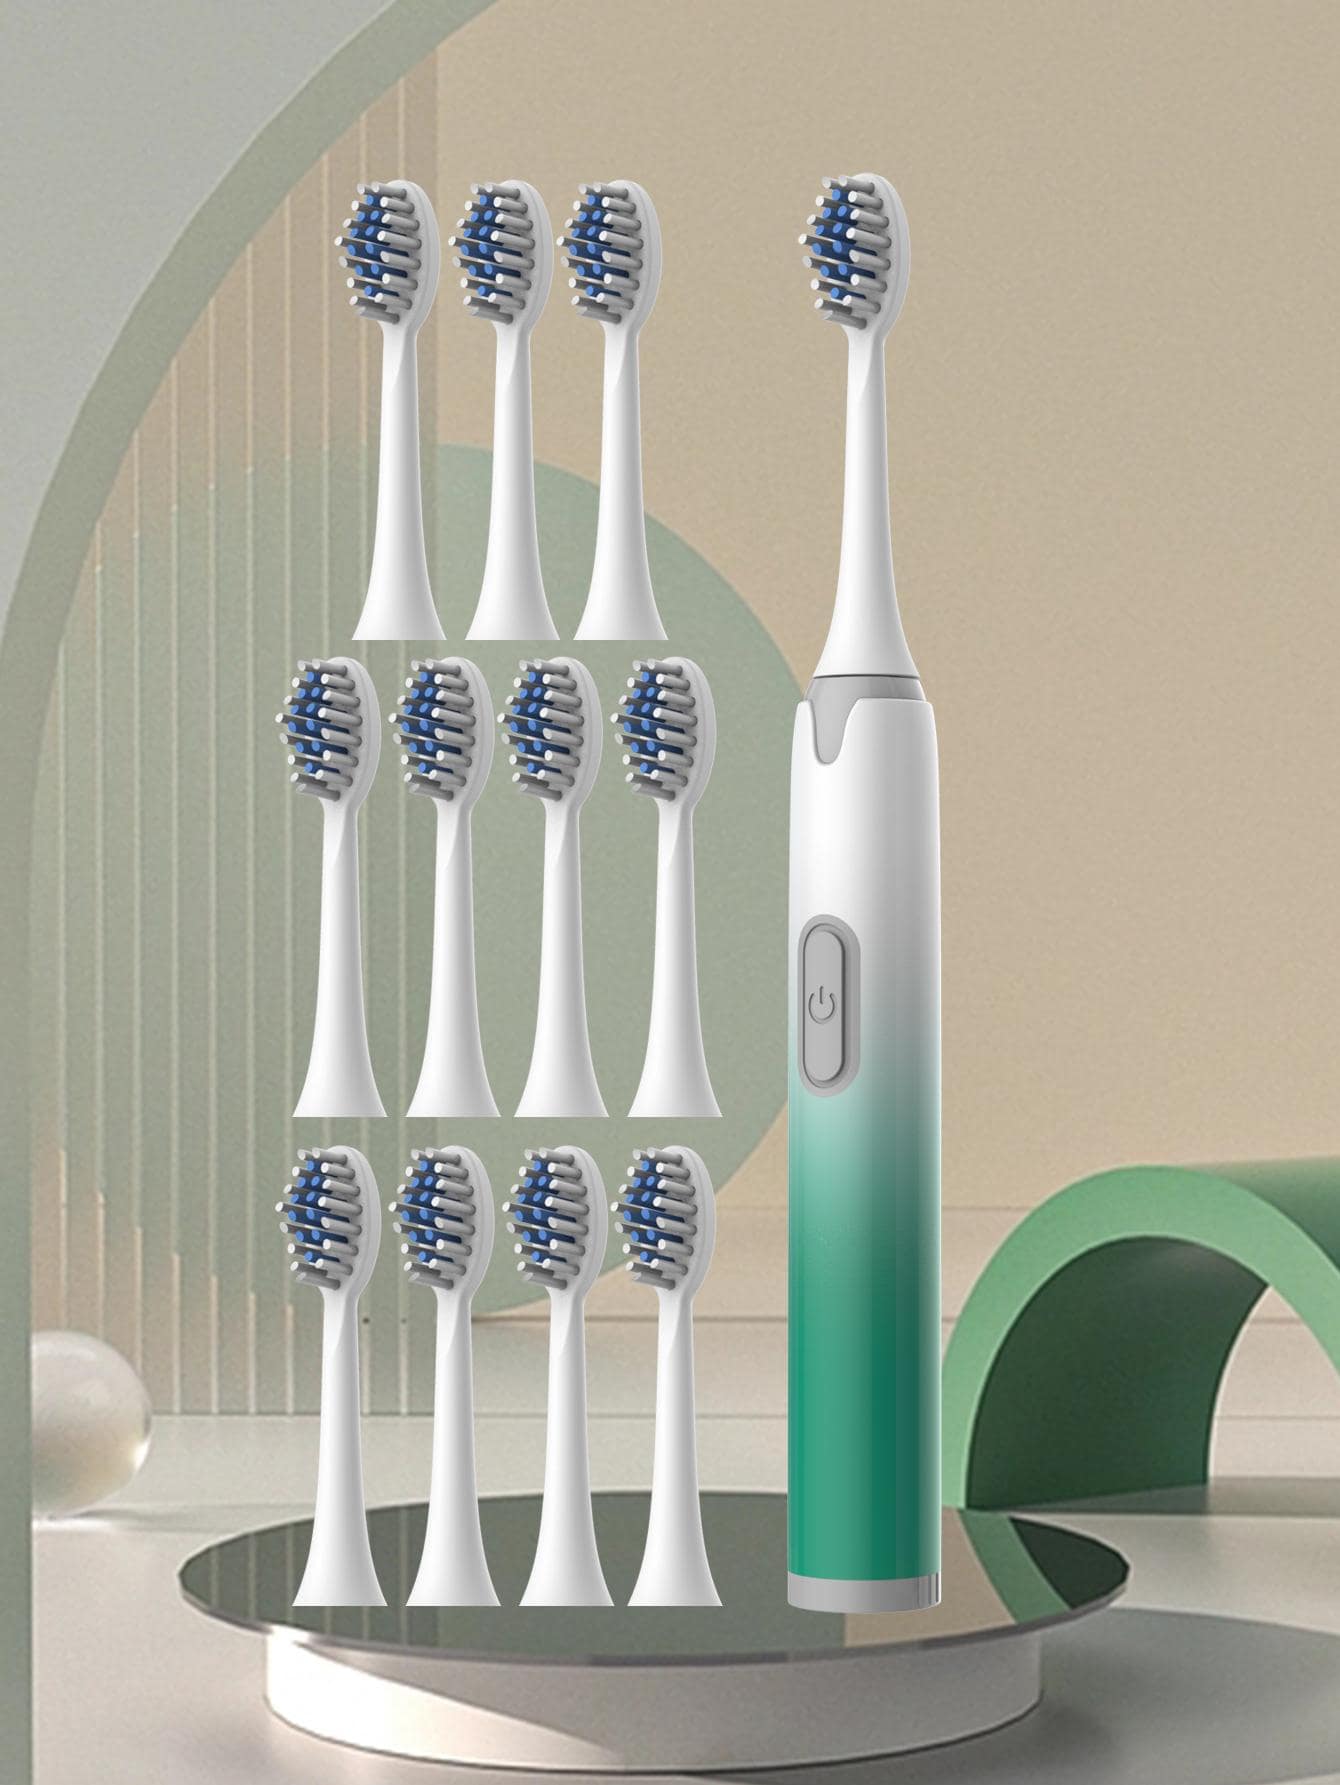 1set PP Electric Toothbrush, Modern Two Tone Waterproof Fully Automatic Electric Toothbrush For Oral Care